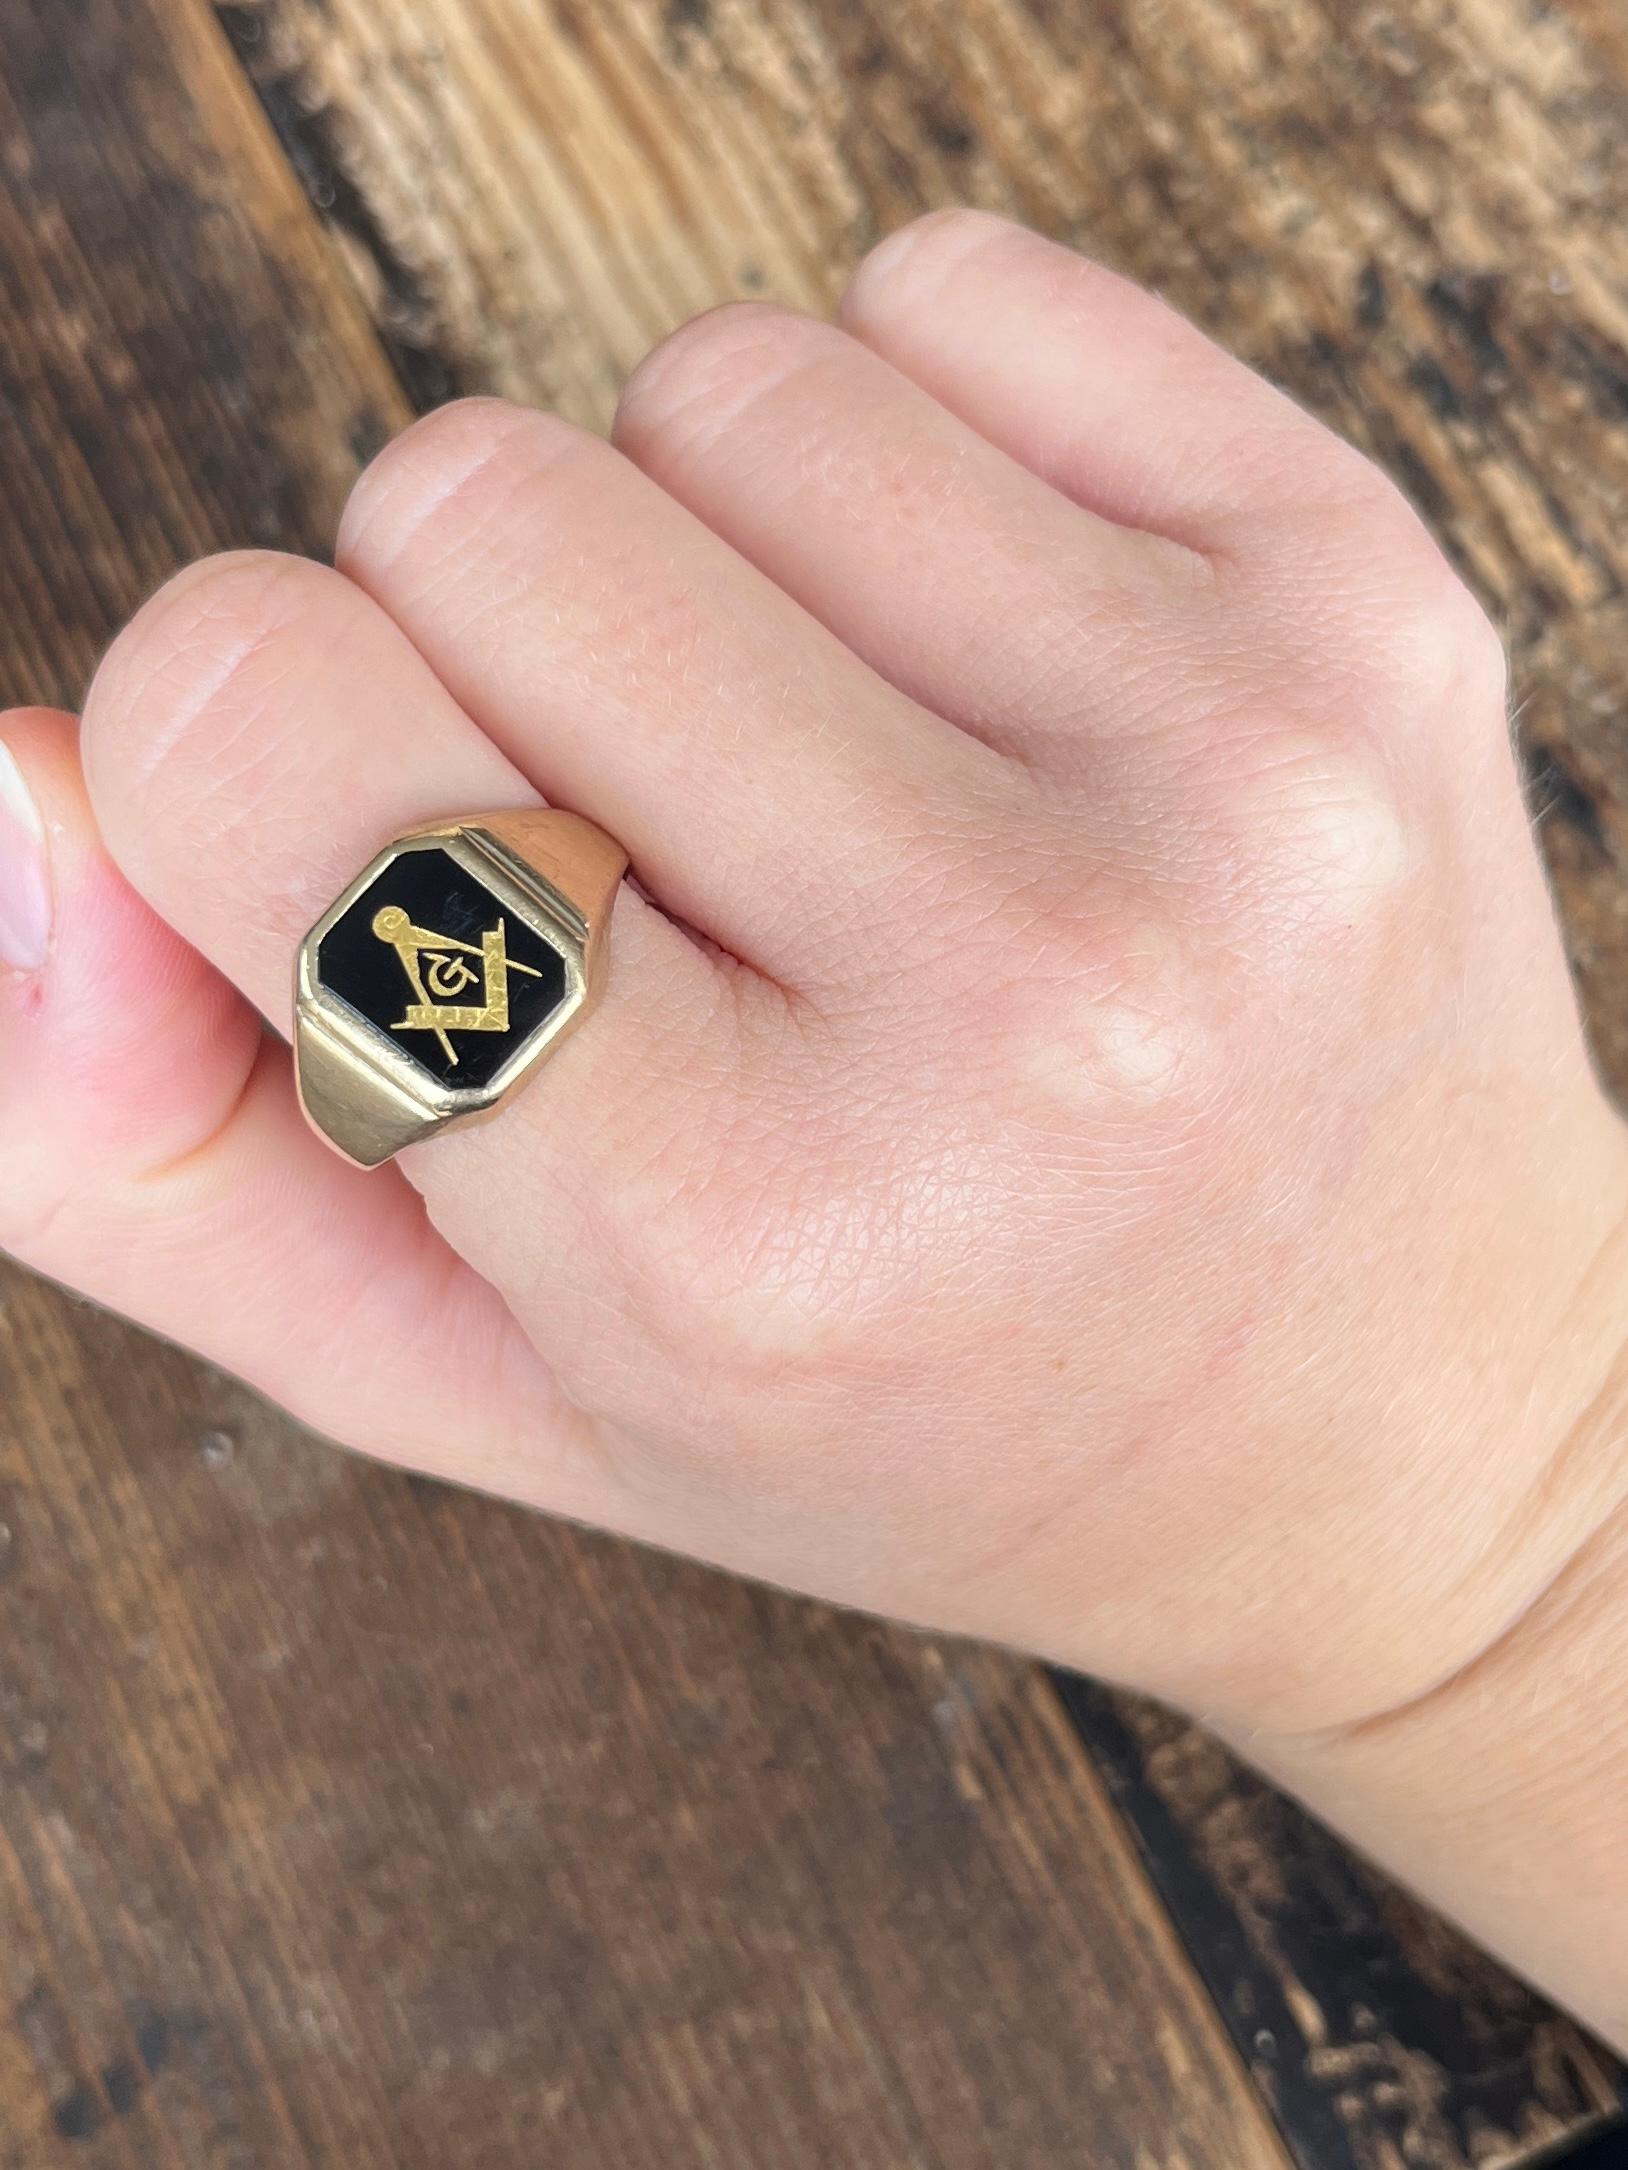 This masonic signet ring is modelled in 9 carat old and has a classic motif and the initial 'G' set within the glossy black onyx. Made in London, England.

Ring Size: U 1/2 or 10 1/4
Widest point: 13.5mm 

Weight: 5.2grams 